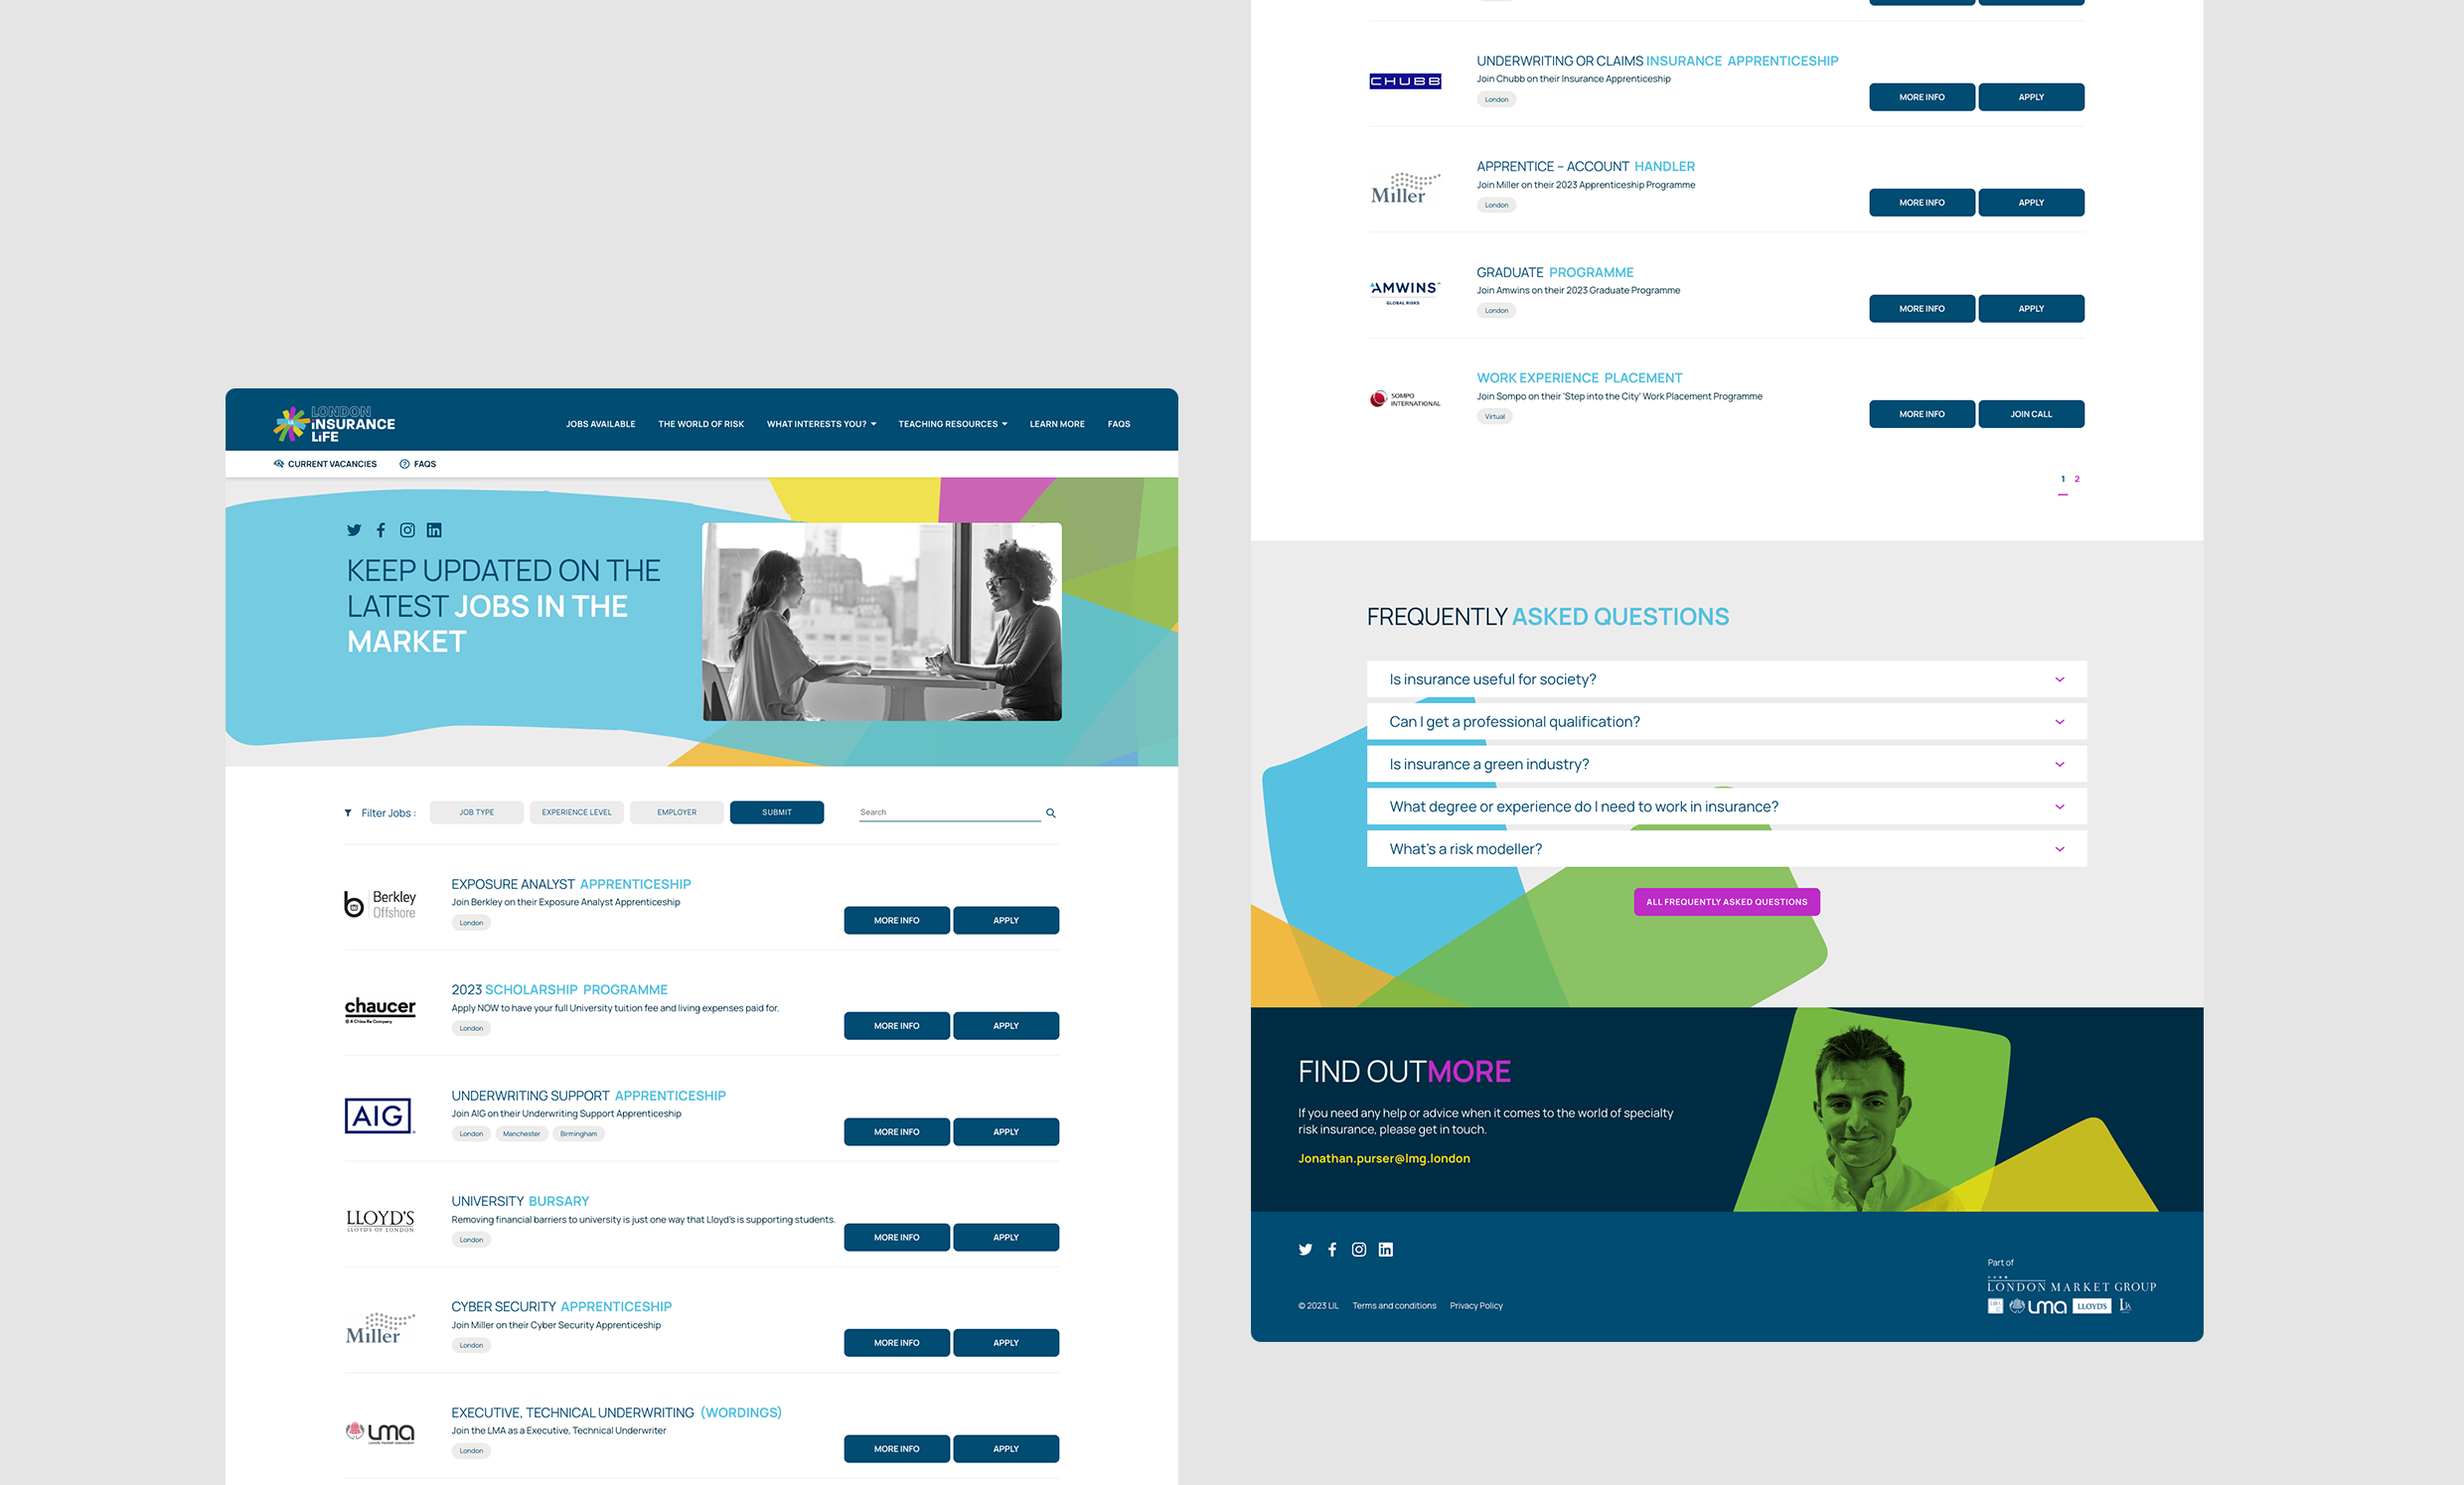 London insurance life page designs